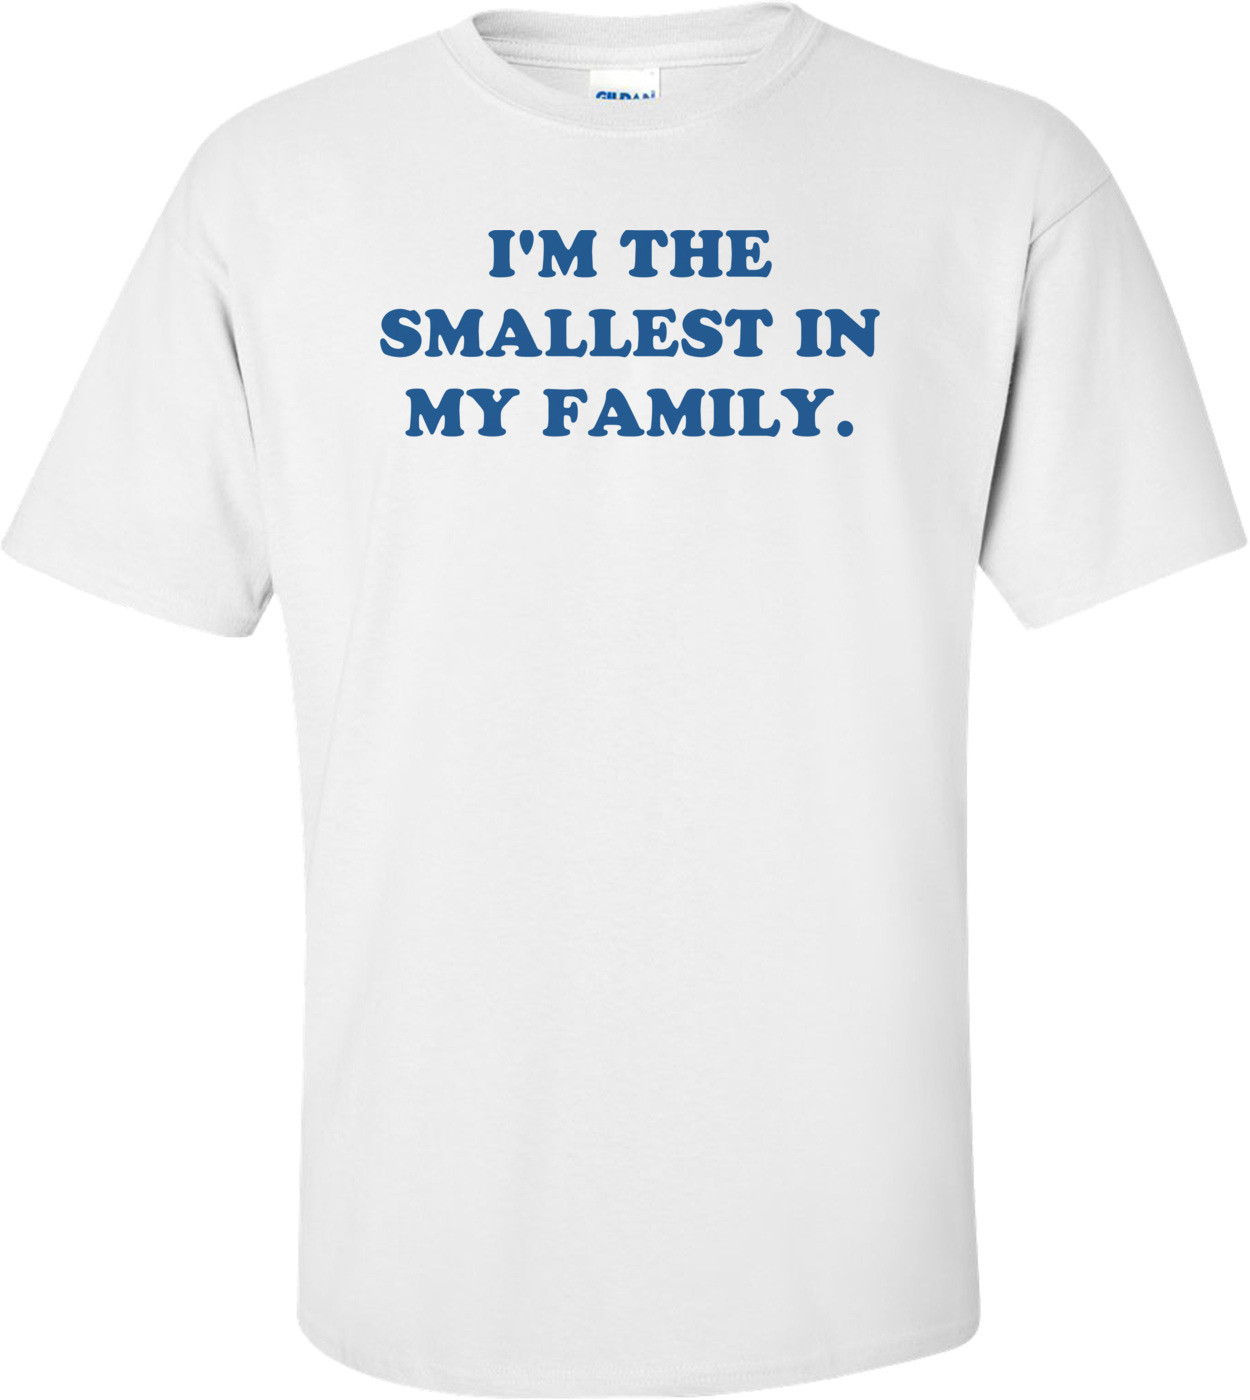 I'M THE SMALLEST IN MY FAMILY. Shirt